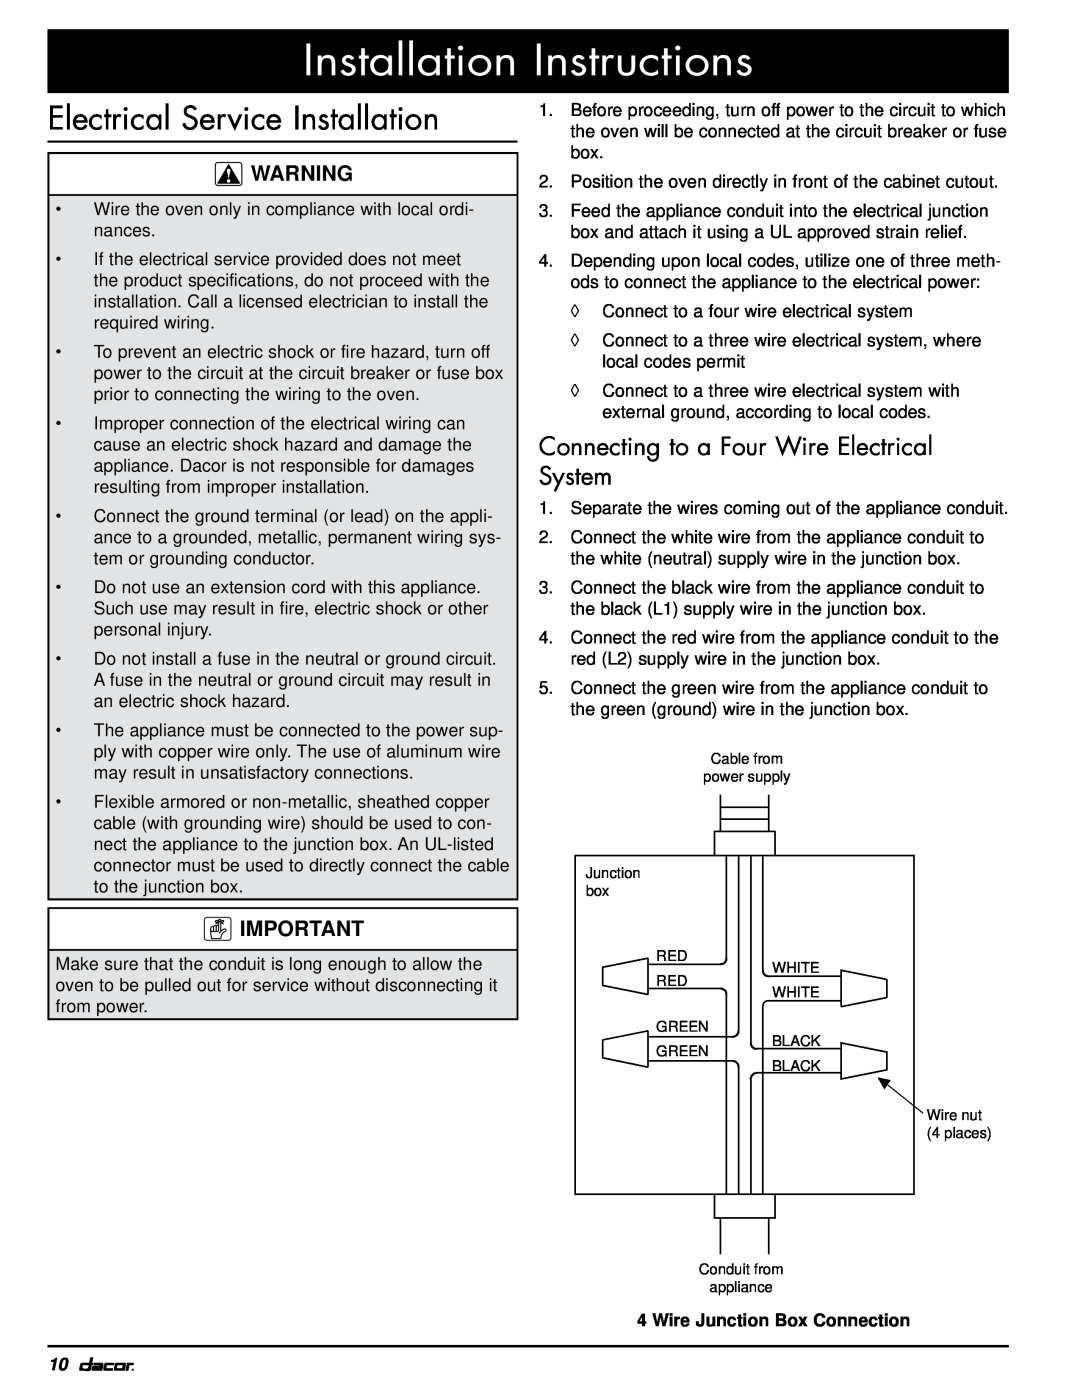 Dacor MOV230 Electrical Service Installation, Connecting to a Four Wire Electrical System, Installation Instructions 